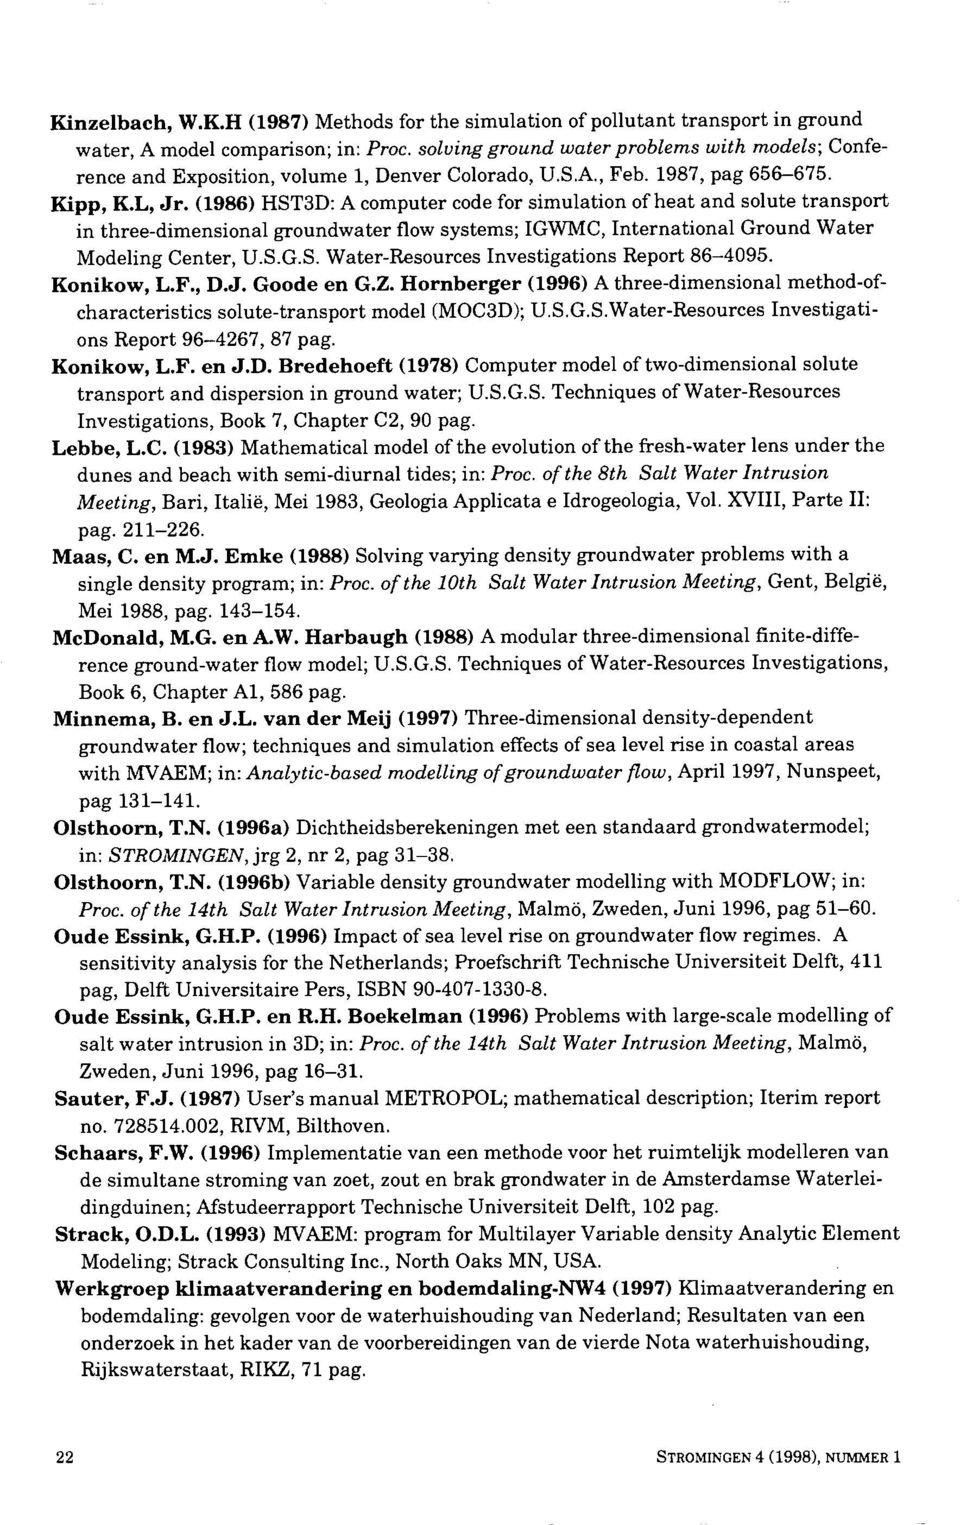 (1986) HST3D: A computer code for simulation of heat and solute transport in three-dimensional groundwater flow systems; IGWMC, International Ground Water Modeling Center, U.S.G.S. Water-Resources Investigations Report 86-4095.